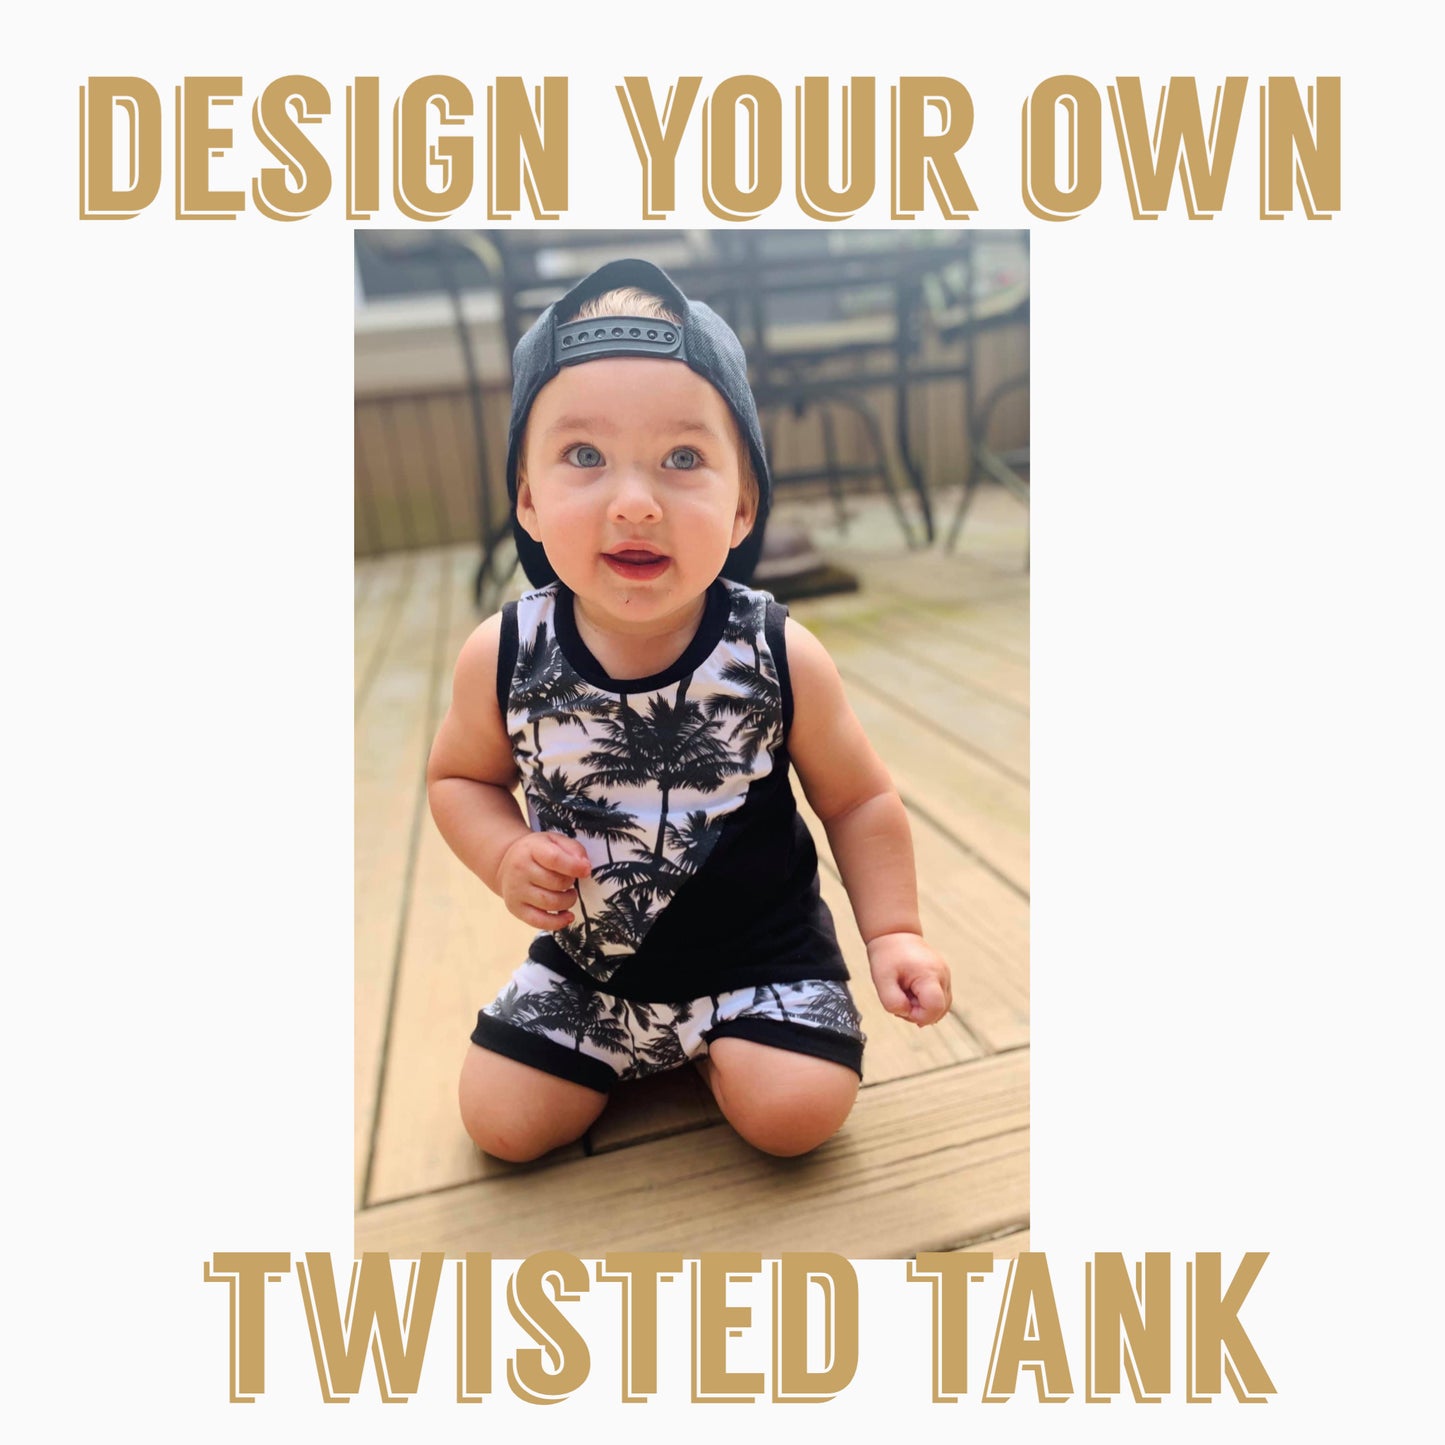 Design Your Own| Twisted Tank